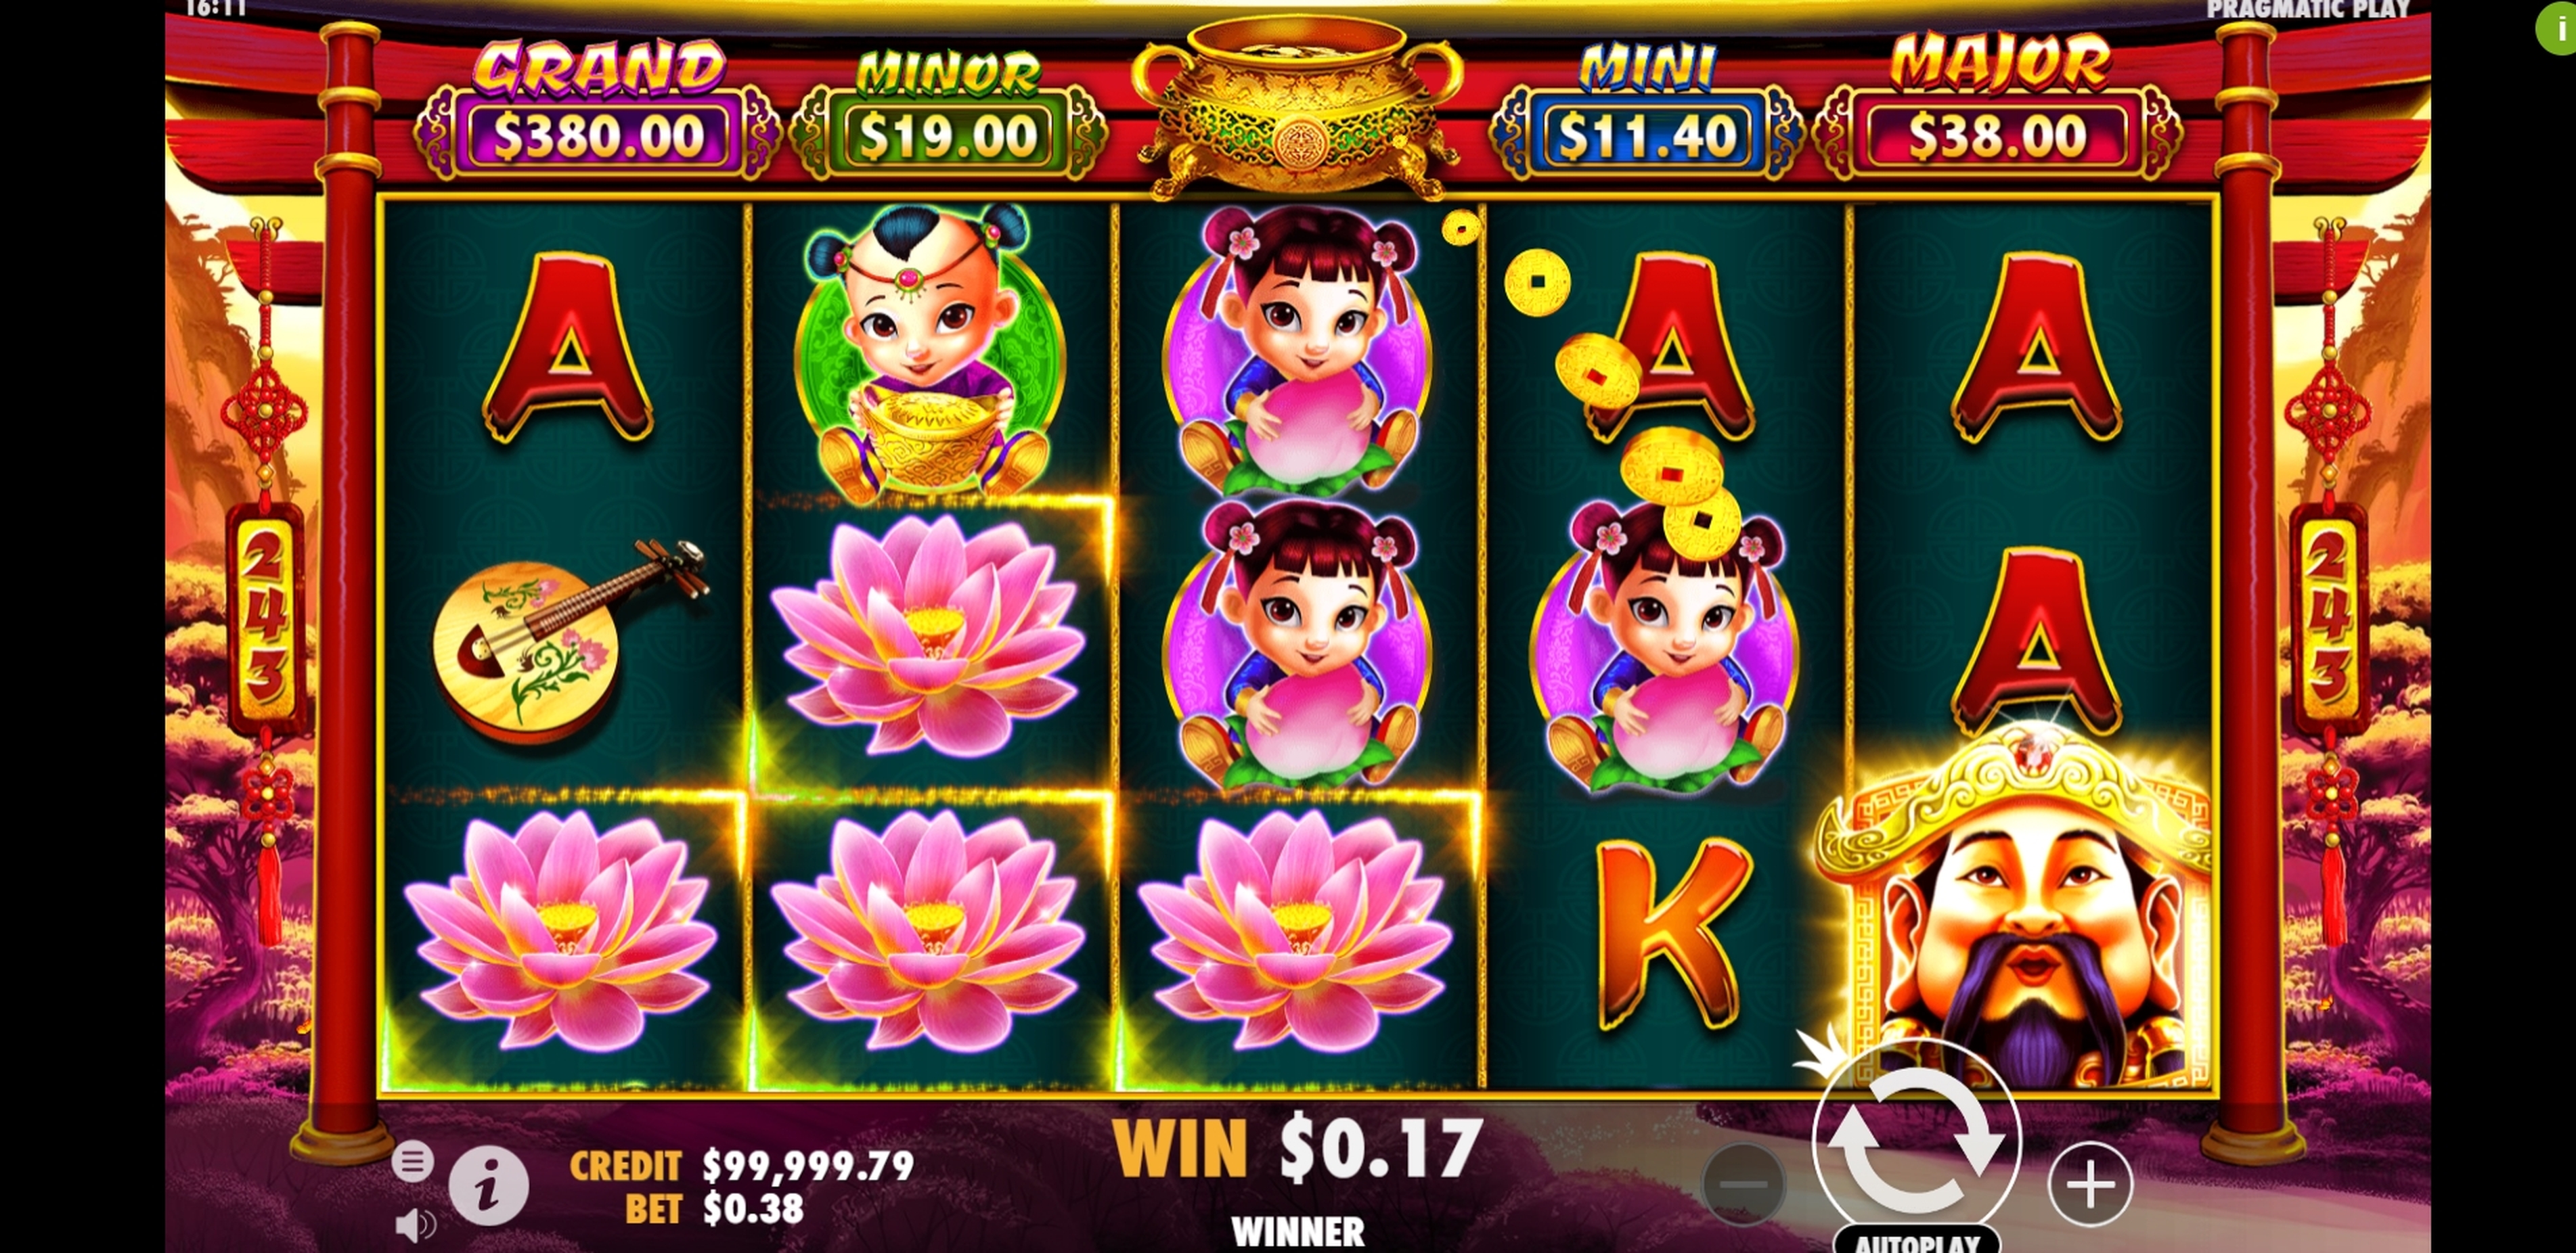 Win Money in Caishen's Gold Free Slot Game by Pragmatic Play